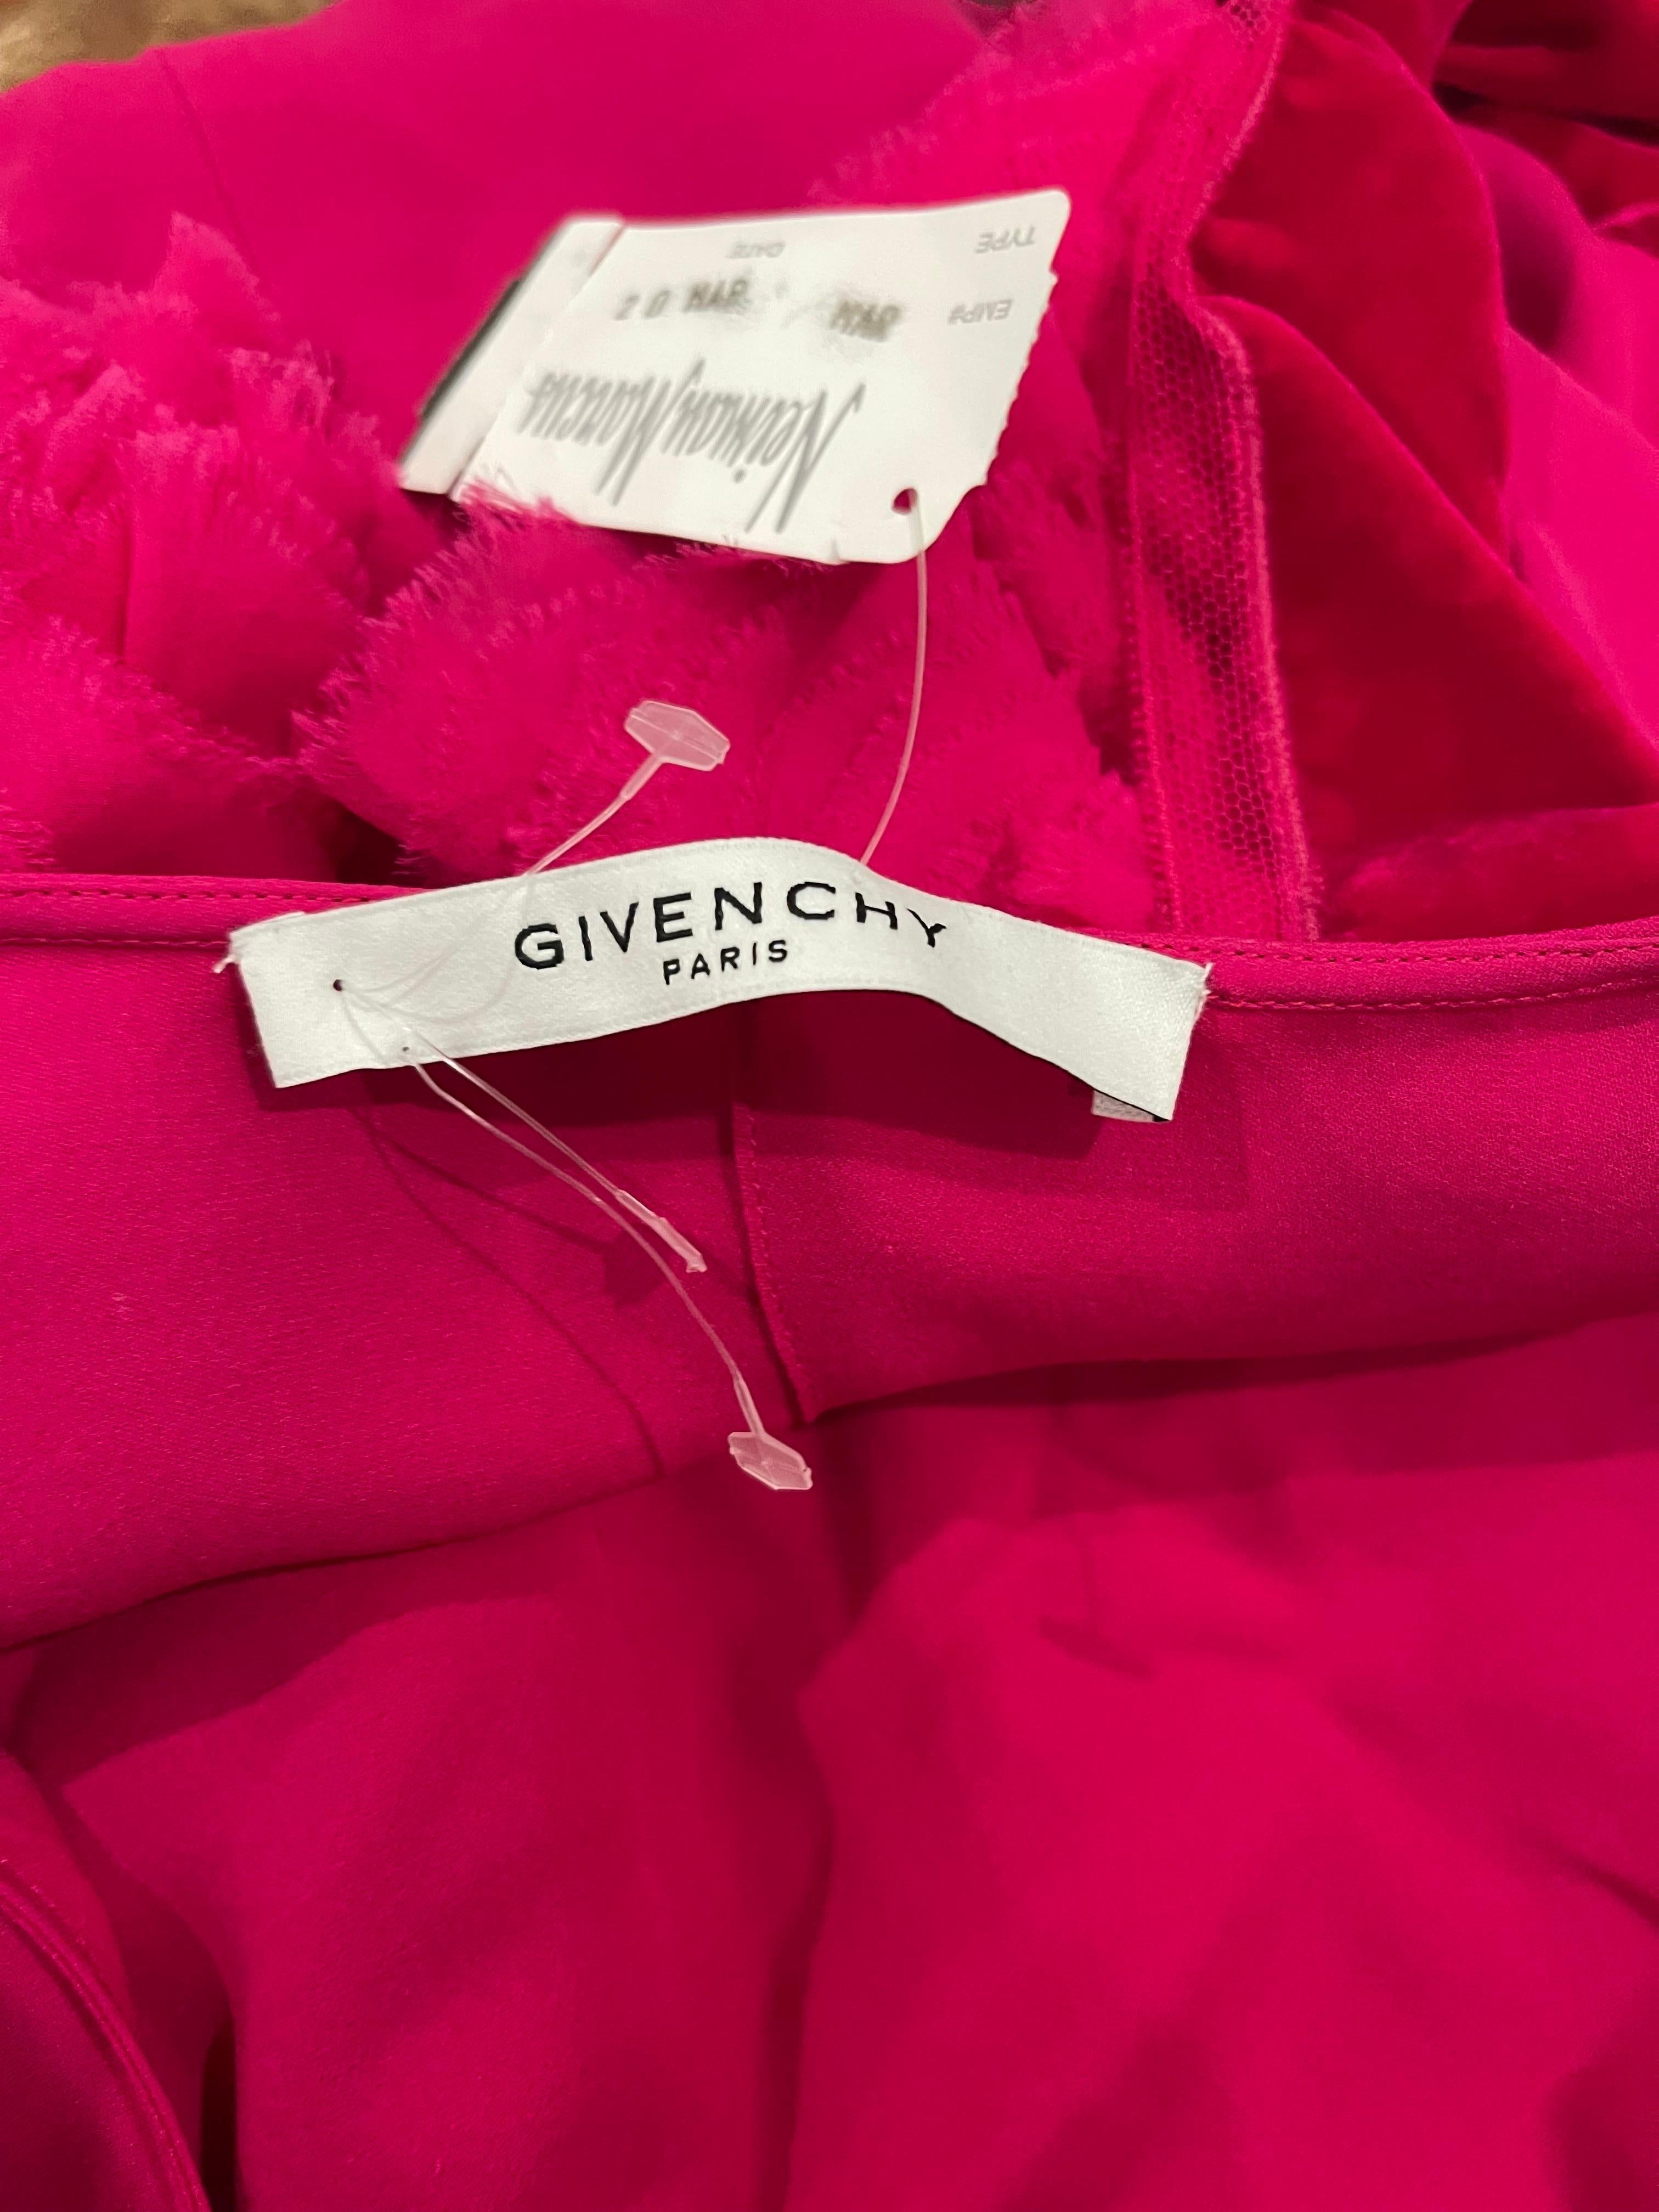 Chic brand new with store tags GIVENCHY S/S 2020 by Clare Waight Keller hot pink silk shirt ! Features an attached tie belt. Asymmetrical hem. Velvet details at each puff sleeve.
Simply slips over the head.
Can easily dress up or down. Pair with a